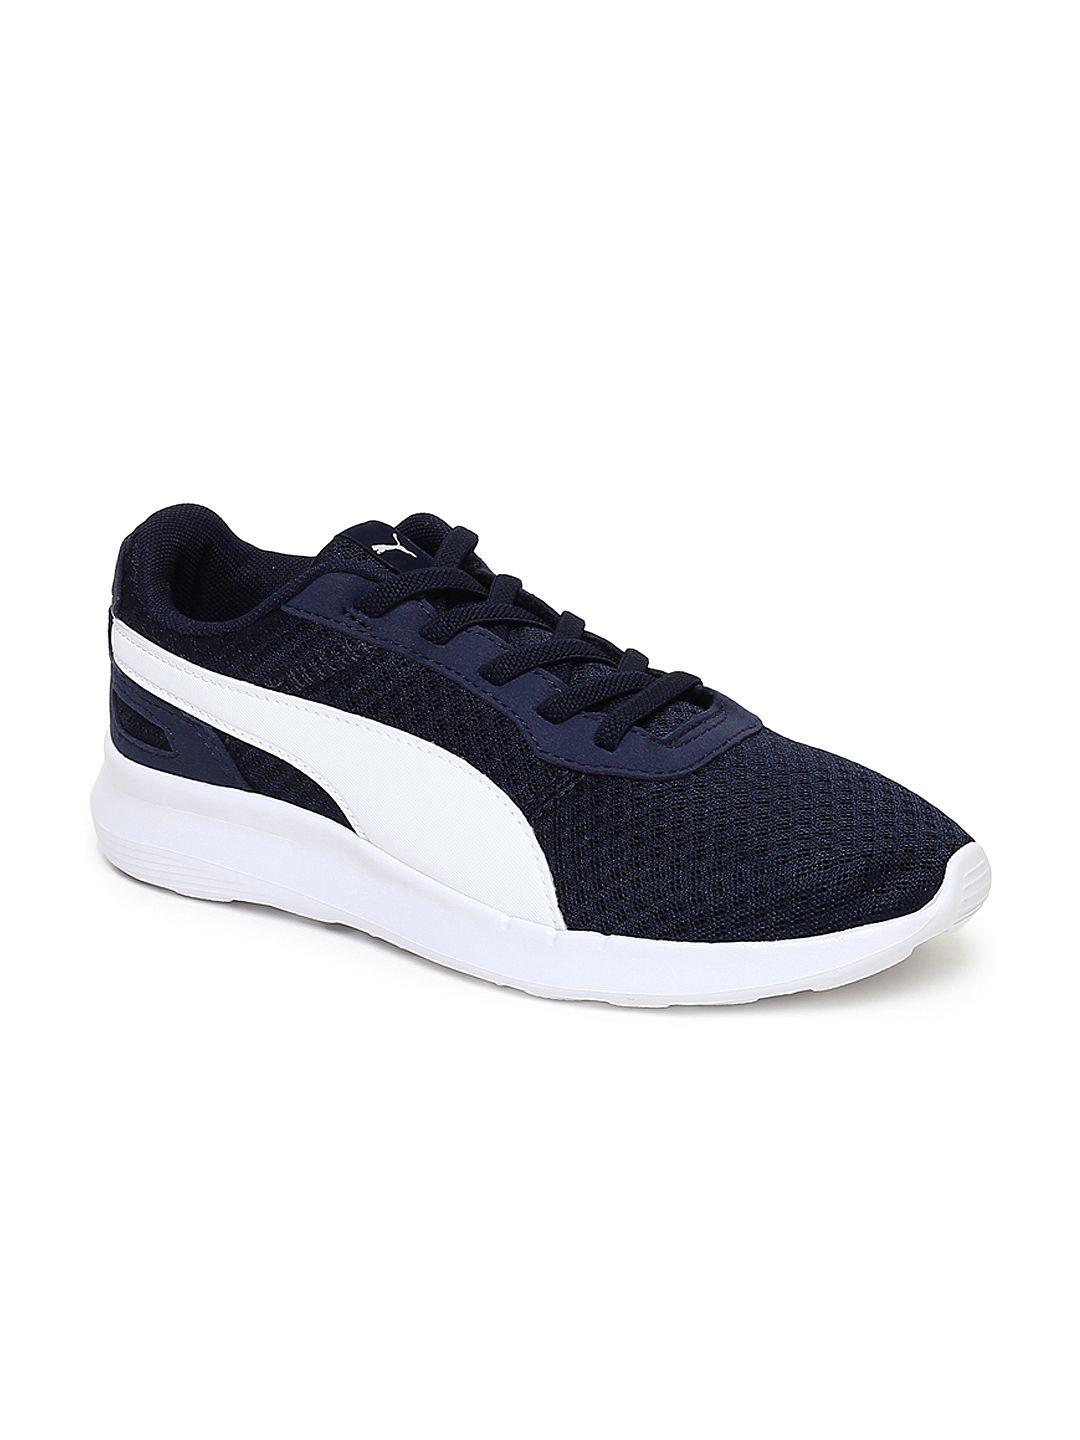 puma unisex navy blue st activate ac ps running shoes